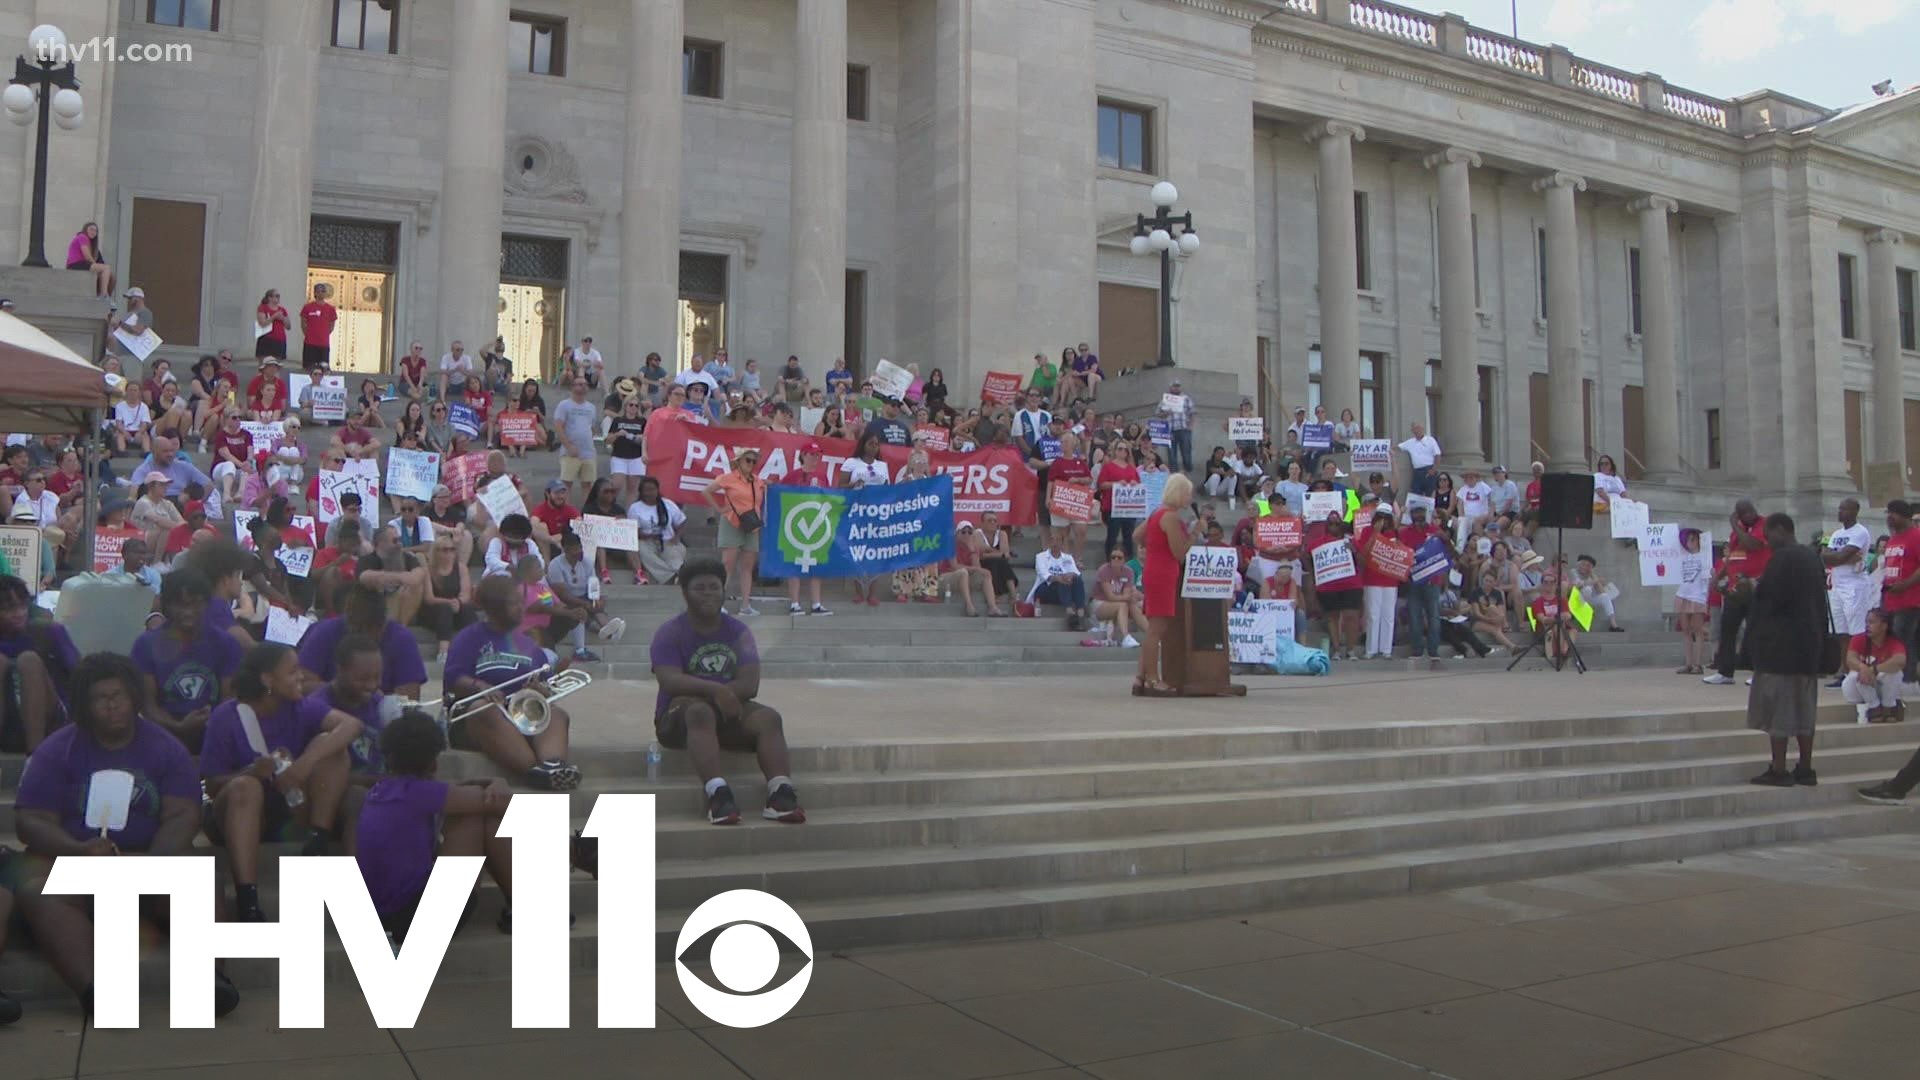 The familiar issue of teacher pay got renewed attention at the state capital as supporters of the movement continue to push for a change.